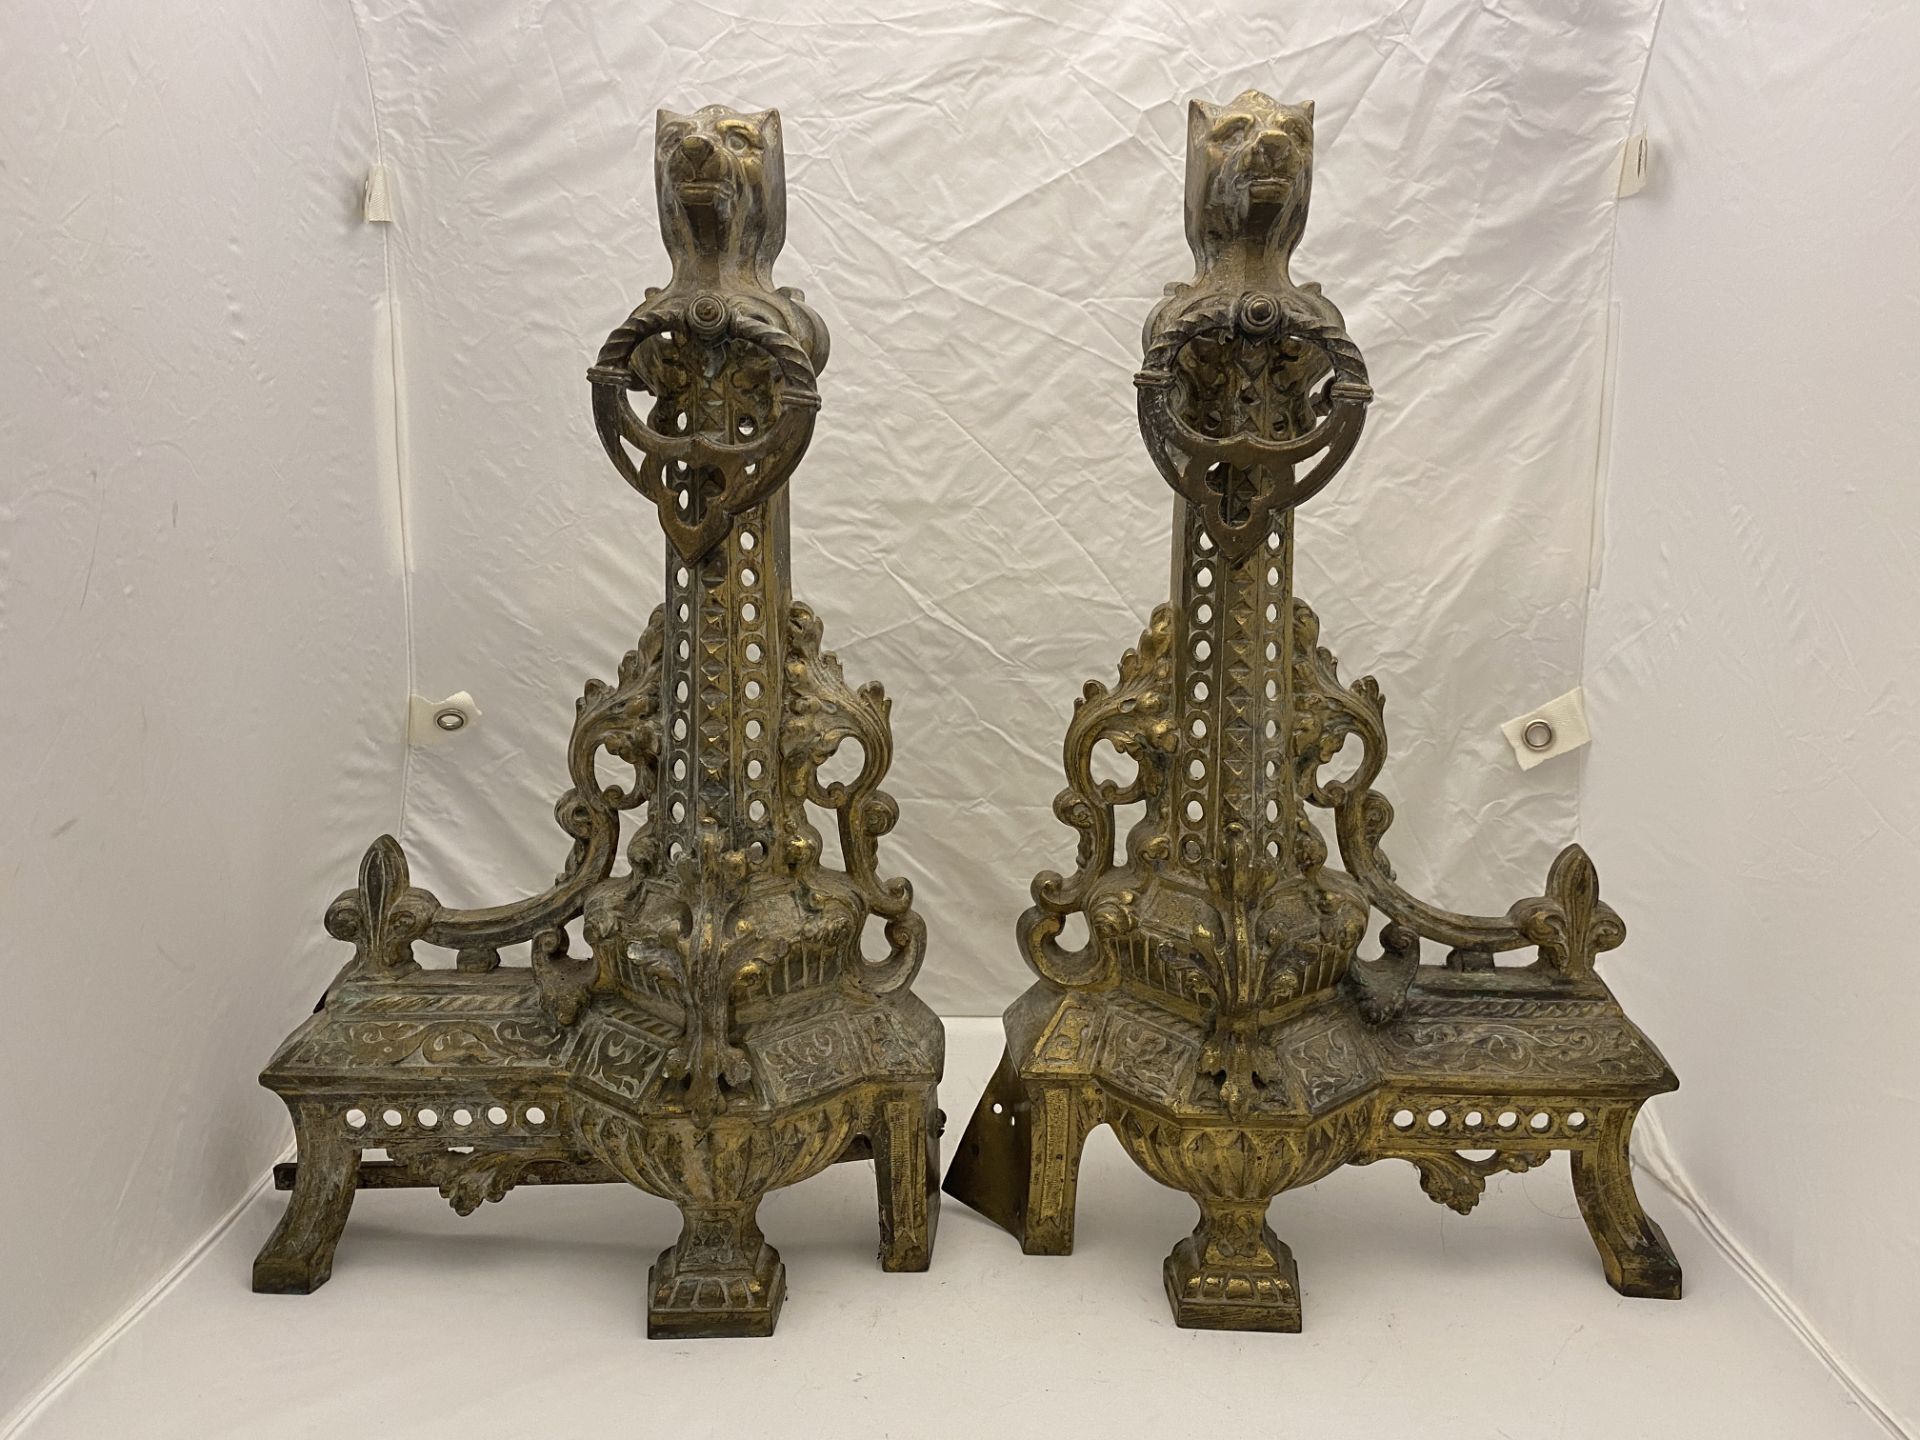 A pair of 19th century French gilt bronze chenets or firedogs - Image 2 of 2